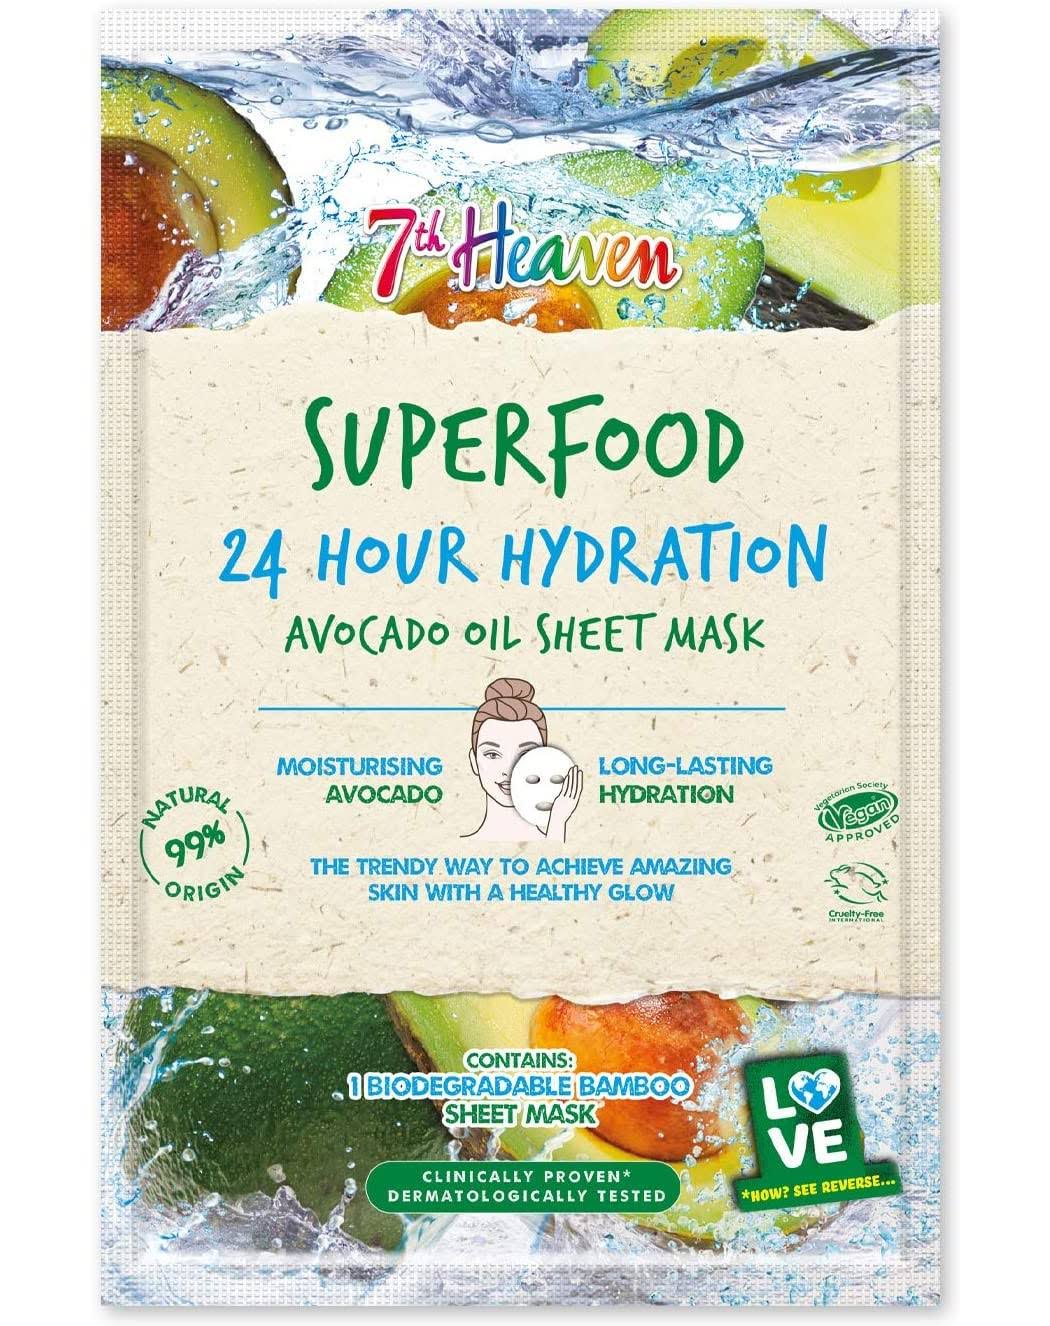 7th Heaven Superfood 24 Hour Hydration Biodegradable Avocado Oil Sheet Mask